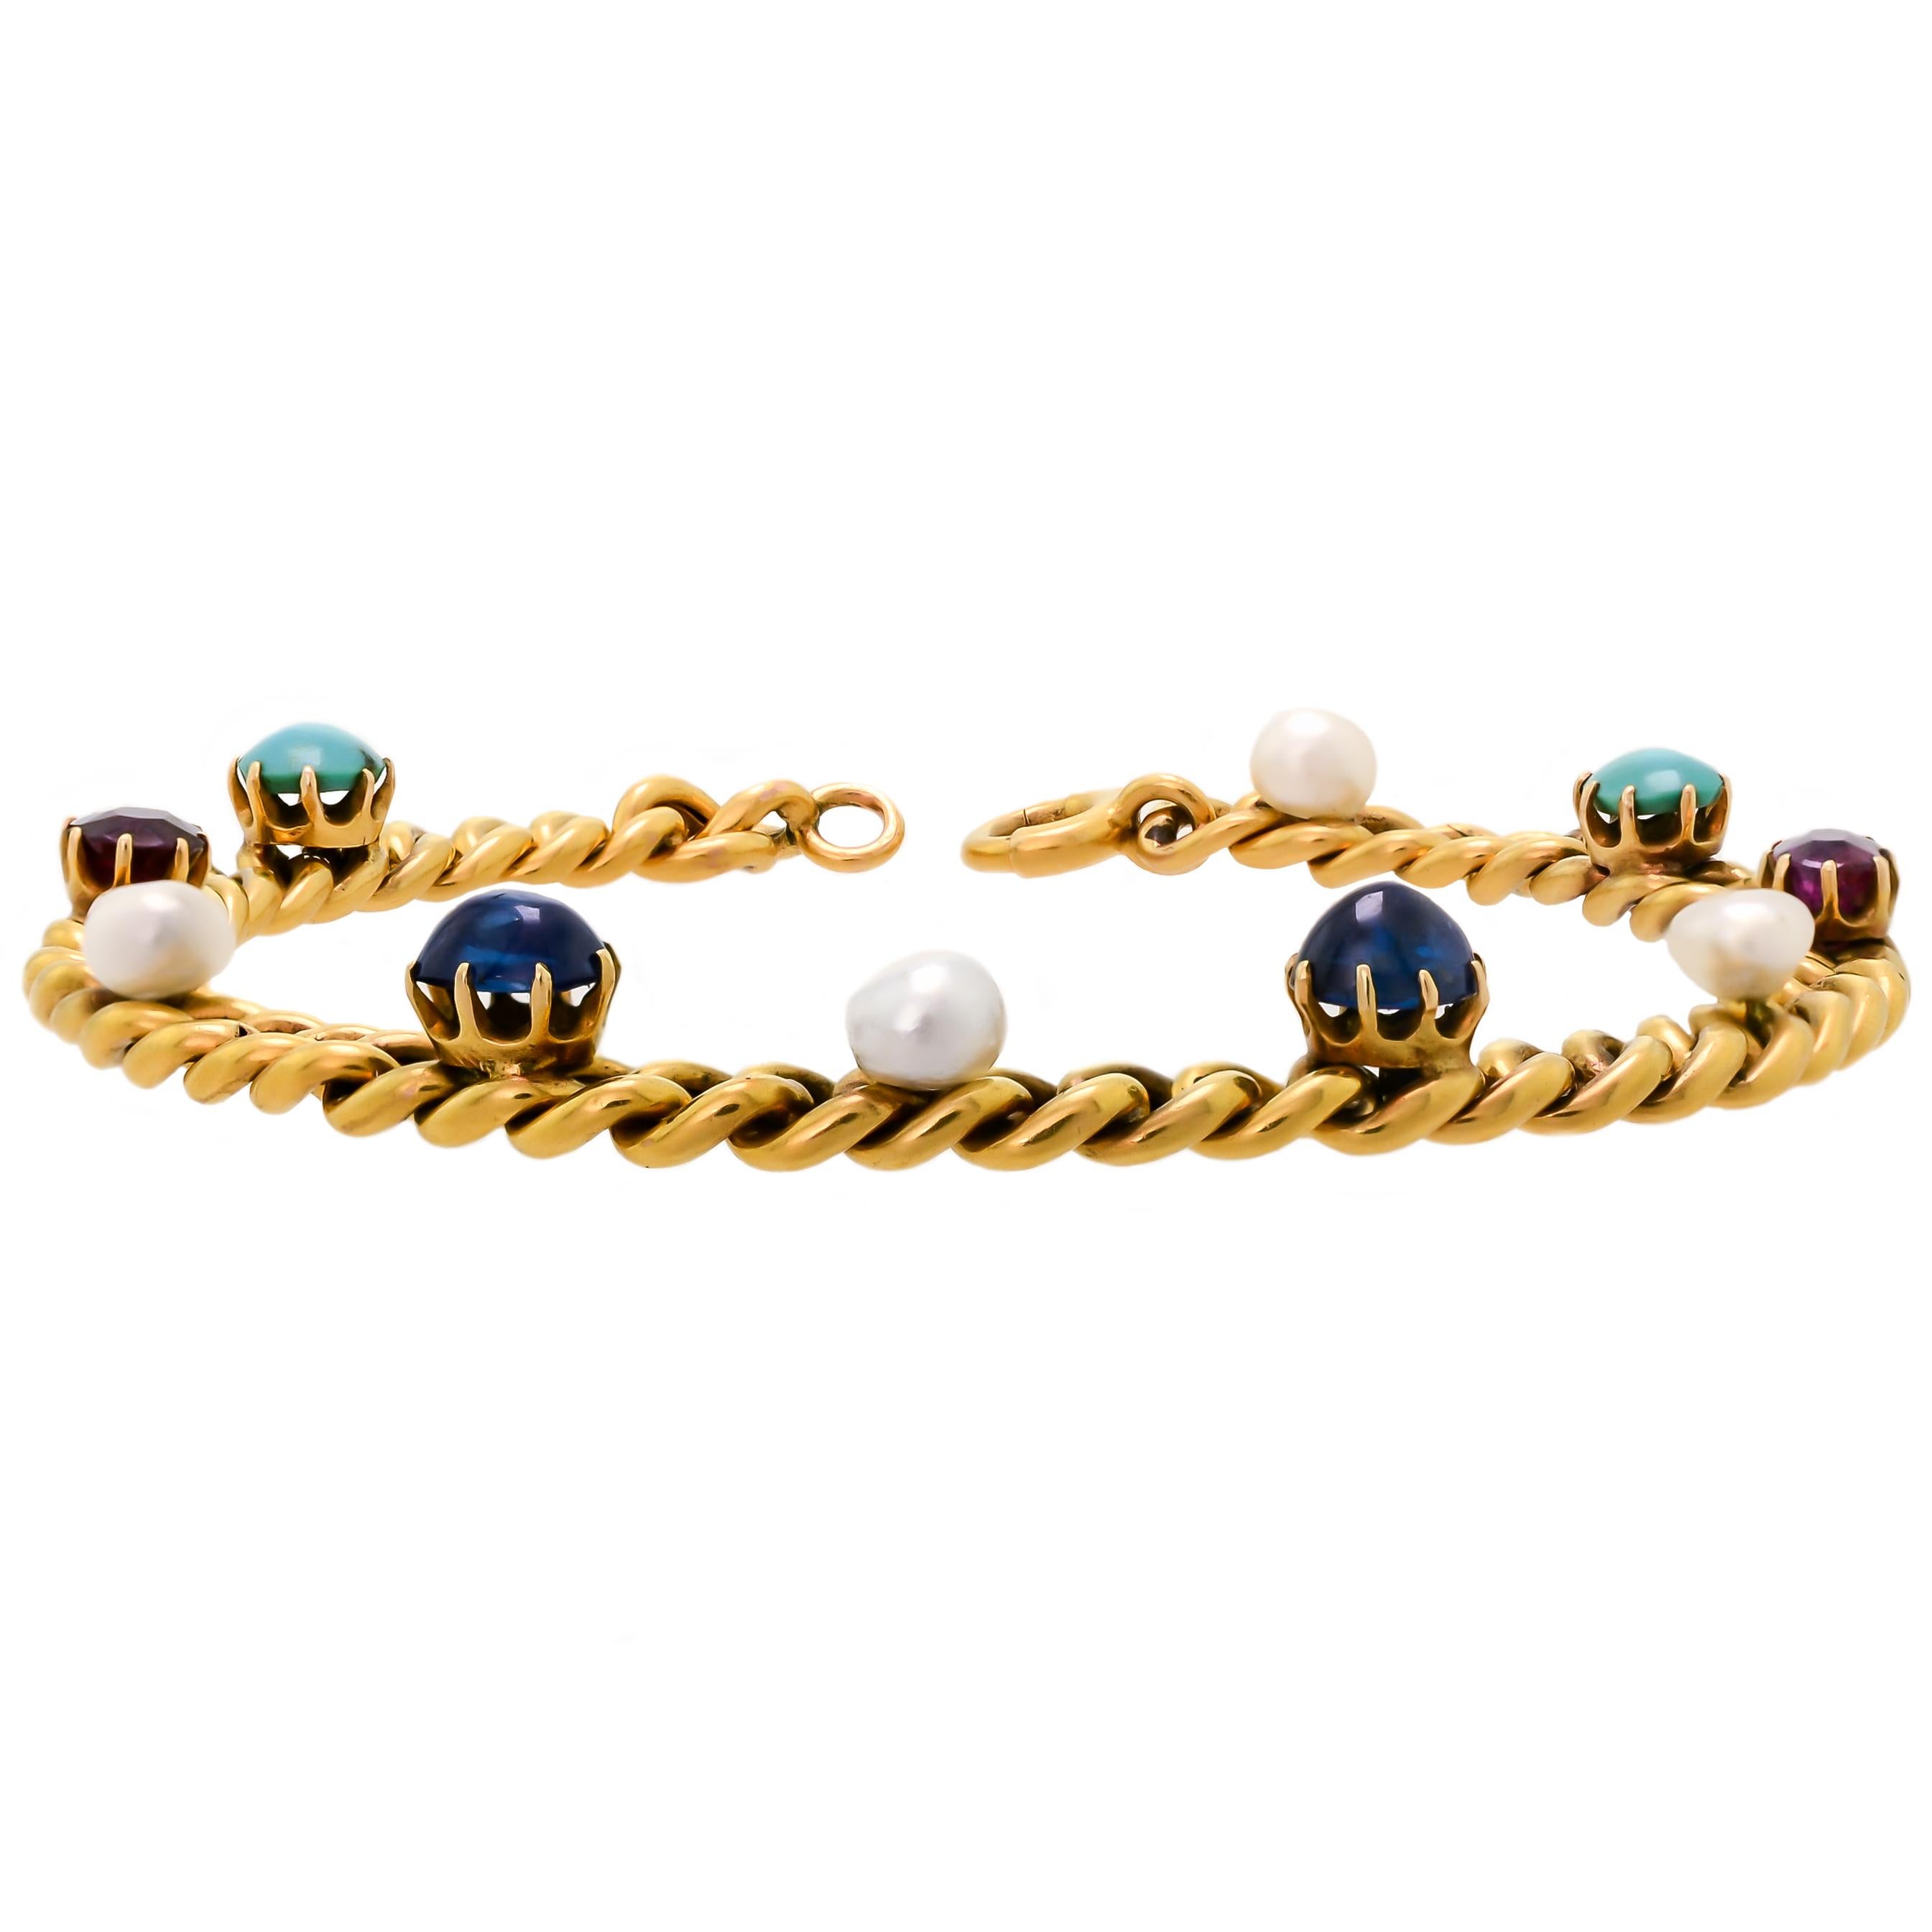 This charming and delightful Victorian 18 karat yellow gold curb-link gem-set bracelet is a beautiful and wearable piece. Set with alternating cabochon turquoise, cabochon sapphires, faceted rubies, and pearls these gems stand out against the rich